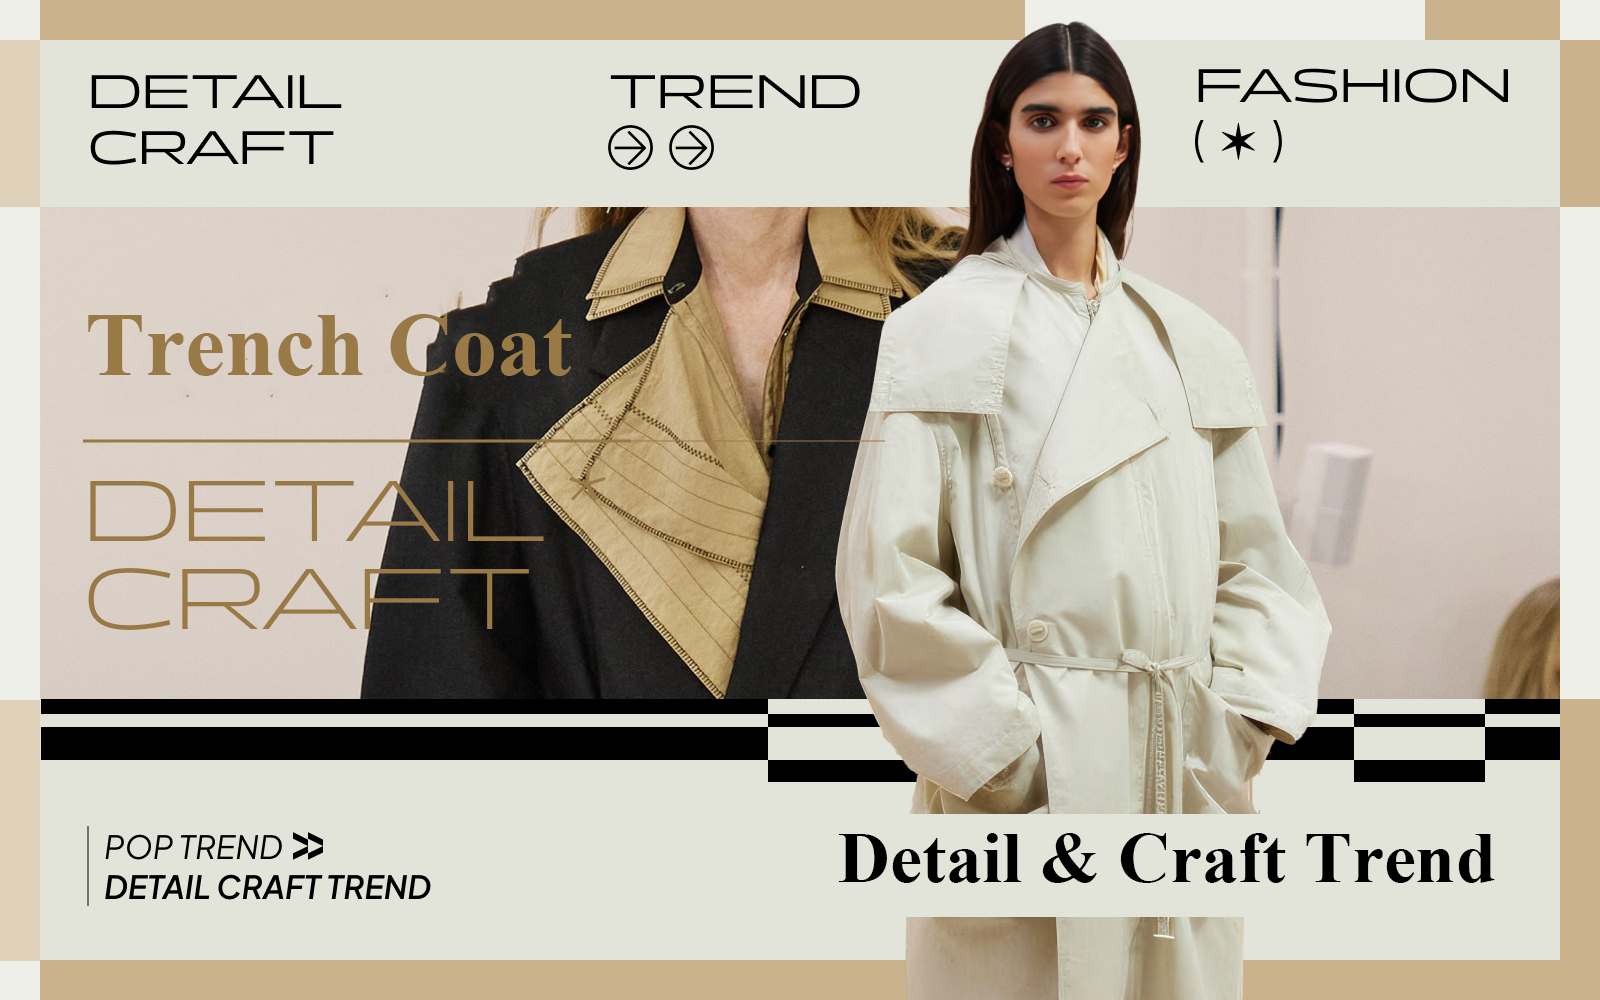 Elegant Outdoor -- The Detail & Craft Trend for Women's Trench Coat